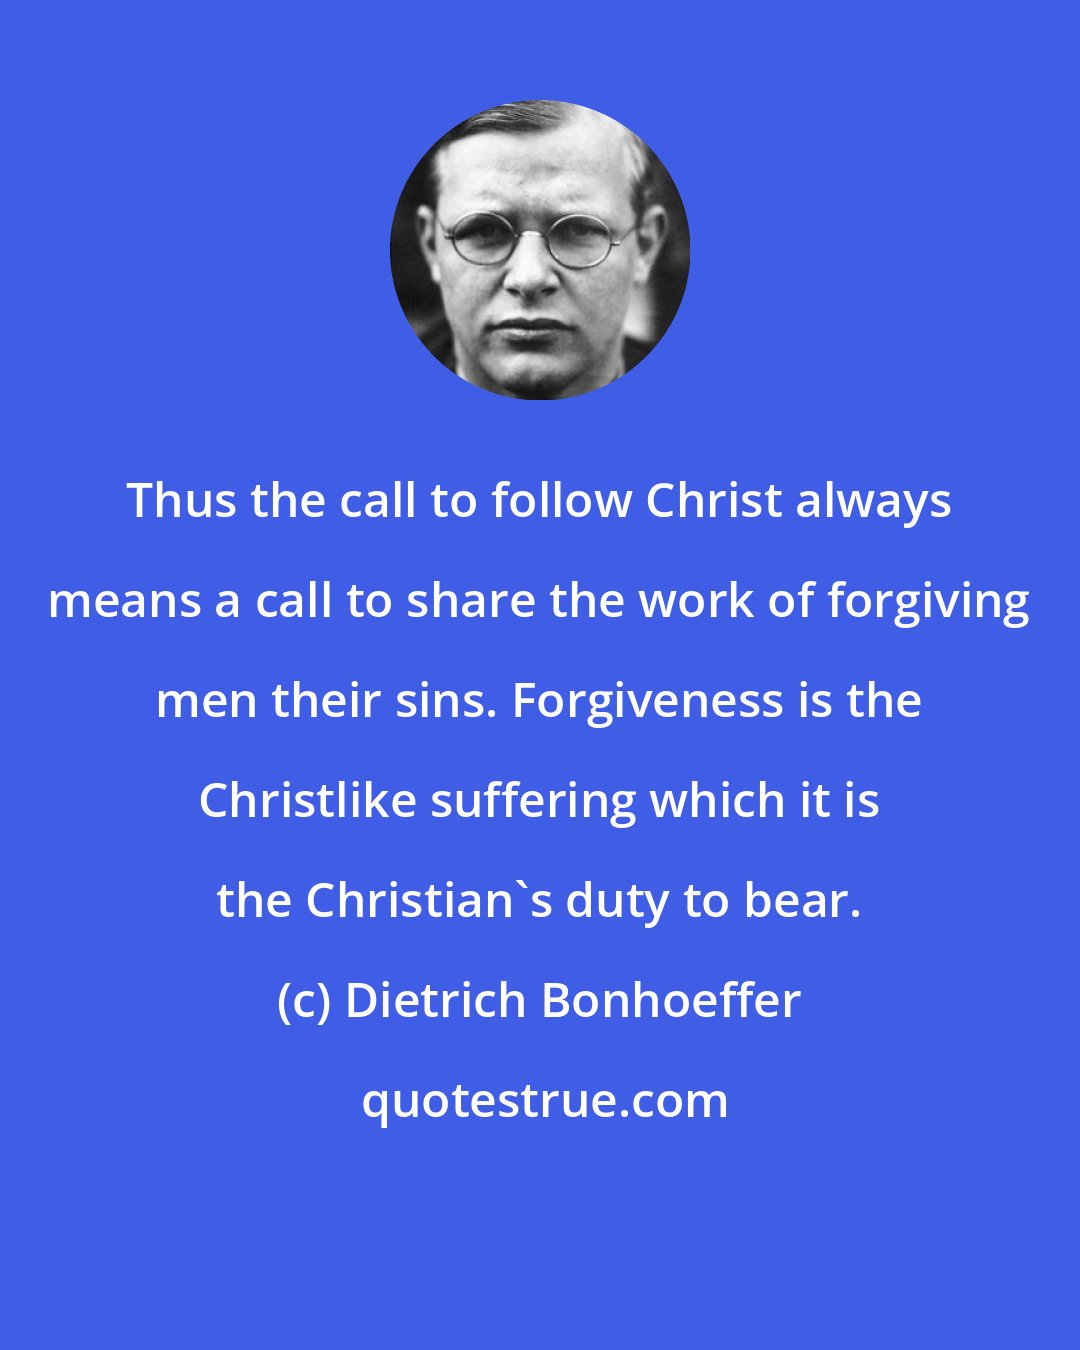 Dietrich Bonhoeffer: Thus the call to follow Christ always means a call to share the work of forgiving men their sins. Forgiveness is the Christlike suffering which it is the Christian's duty to bear.